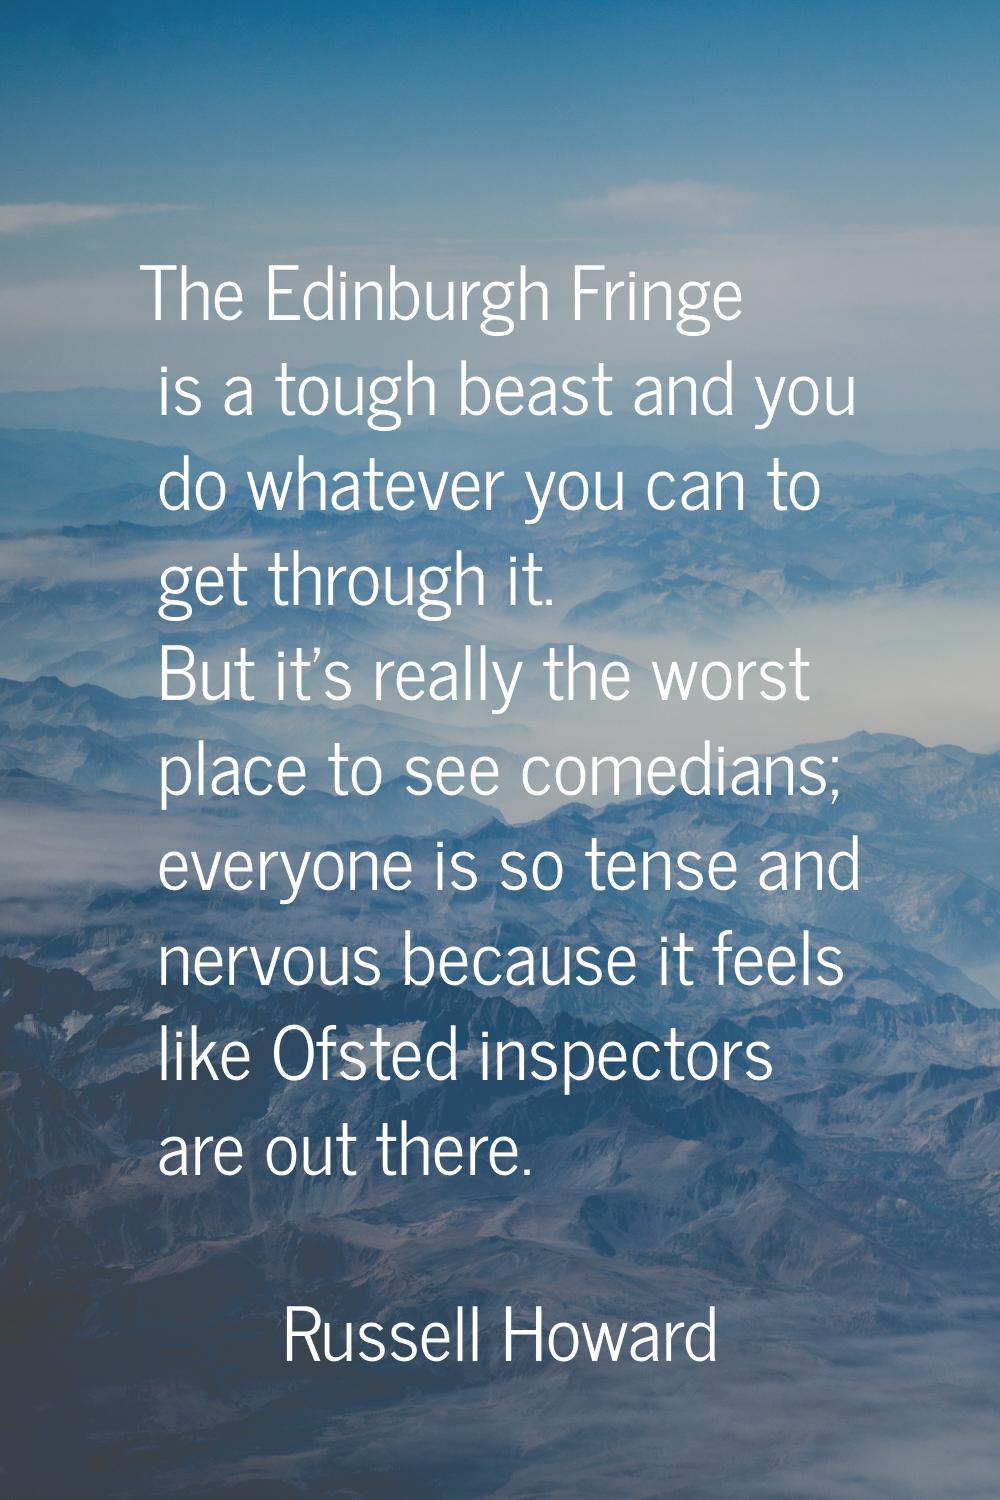 The Edinburgh Fringe is a tough beast and you do whatever you can to get through it. But it's reall